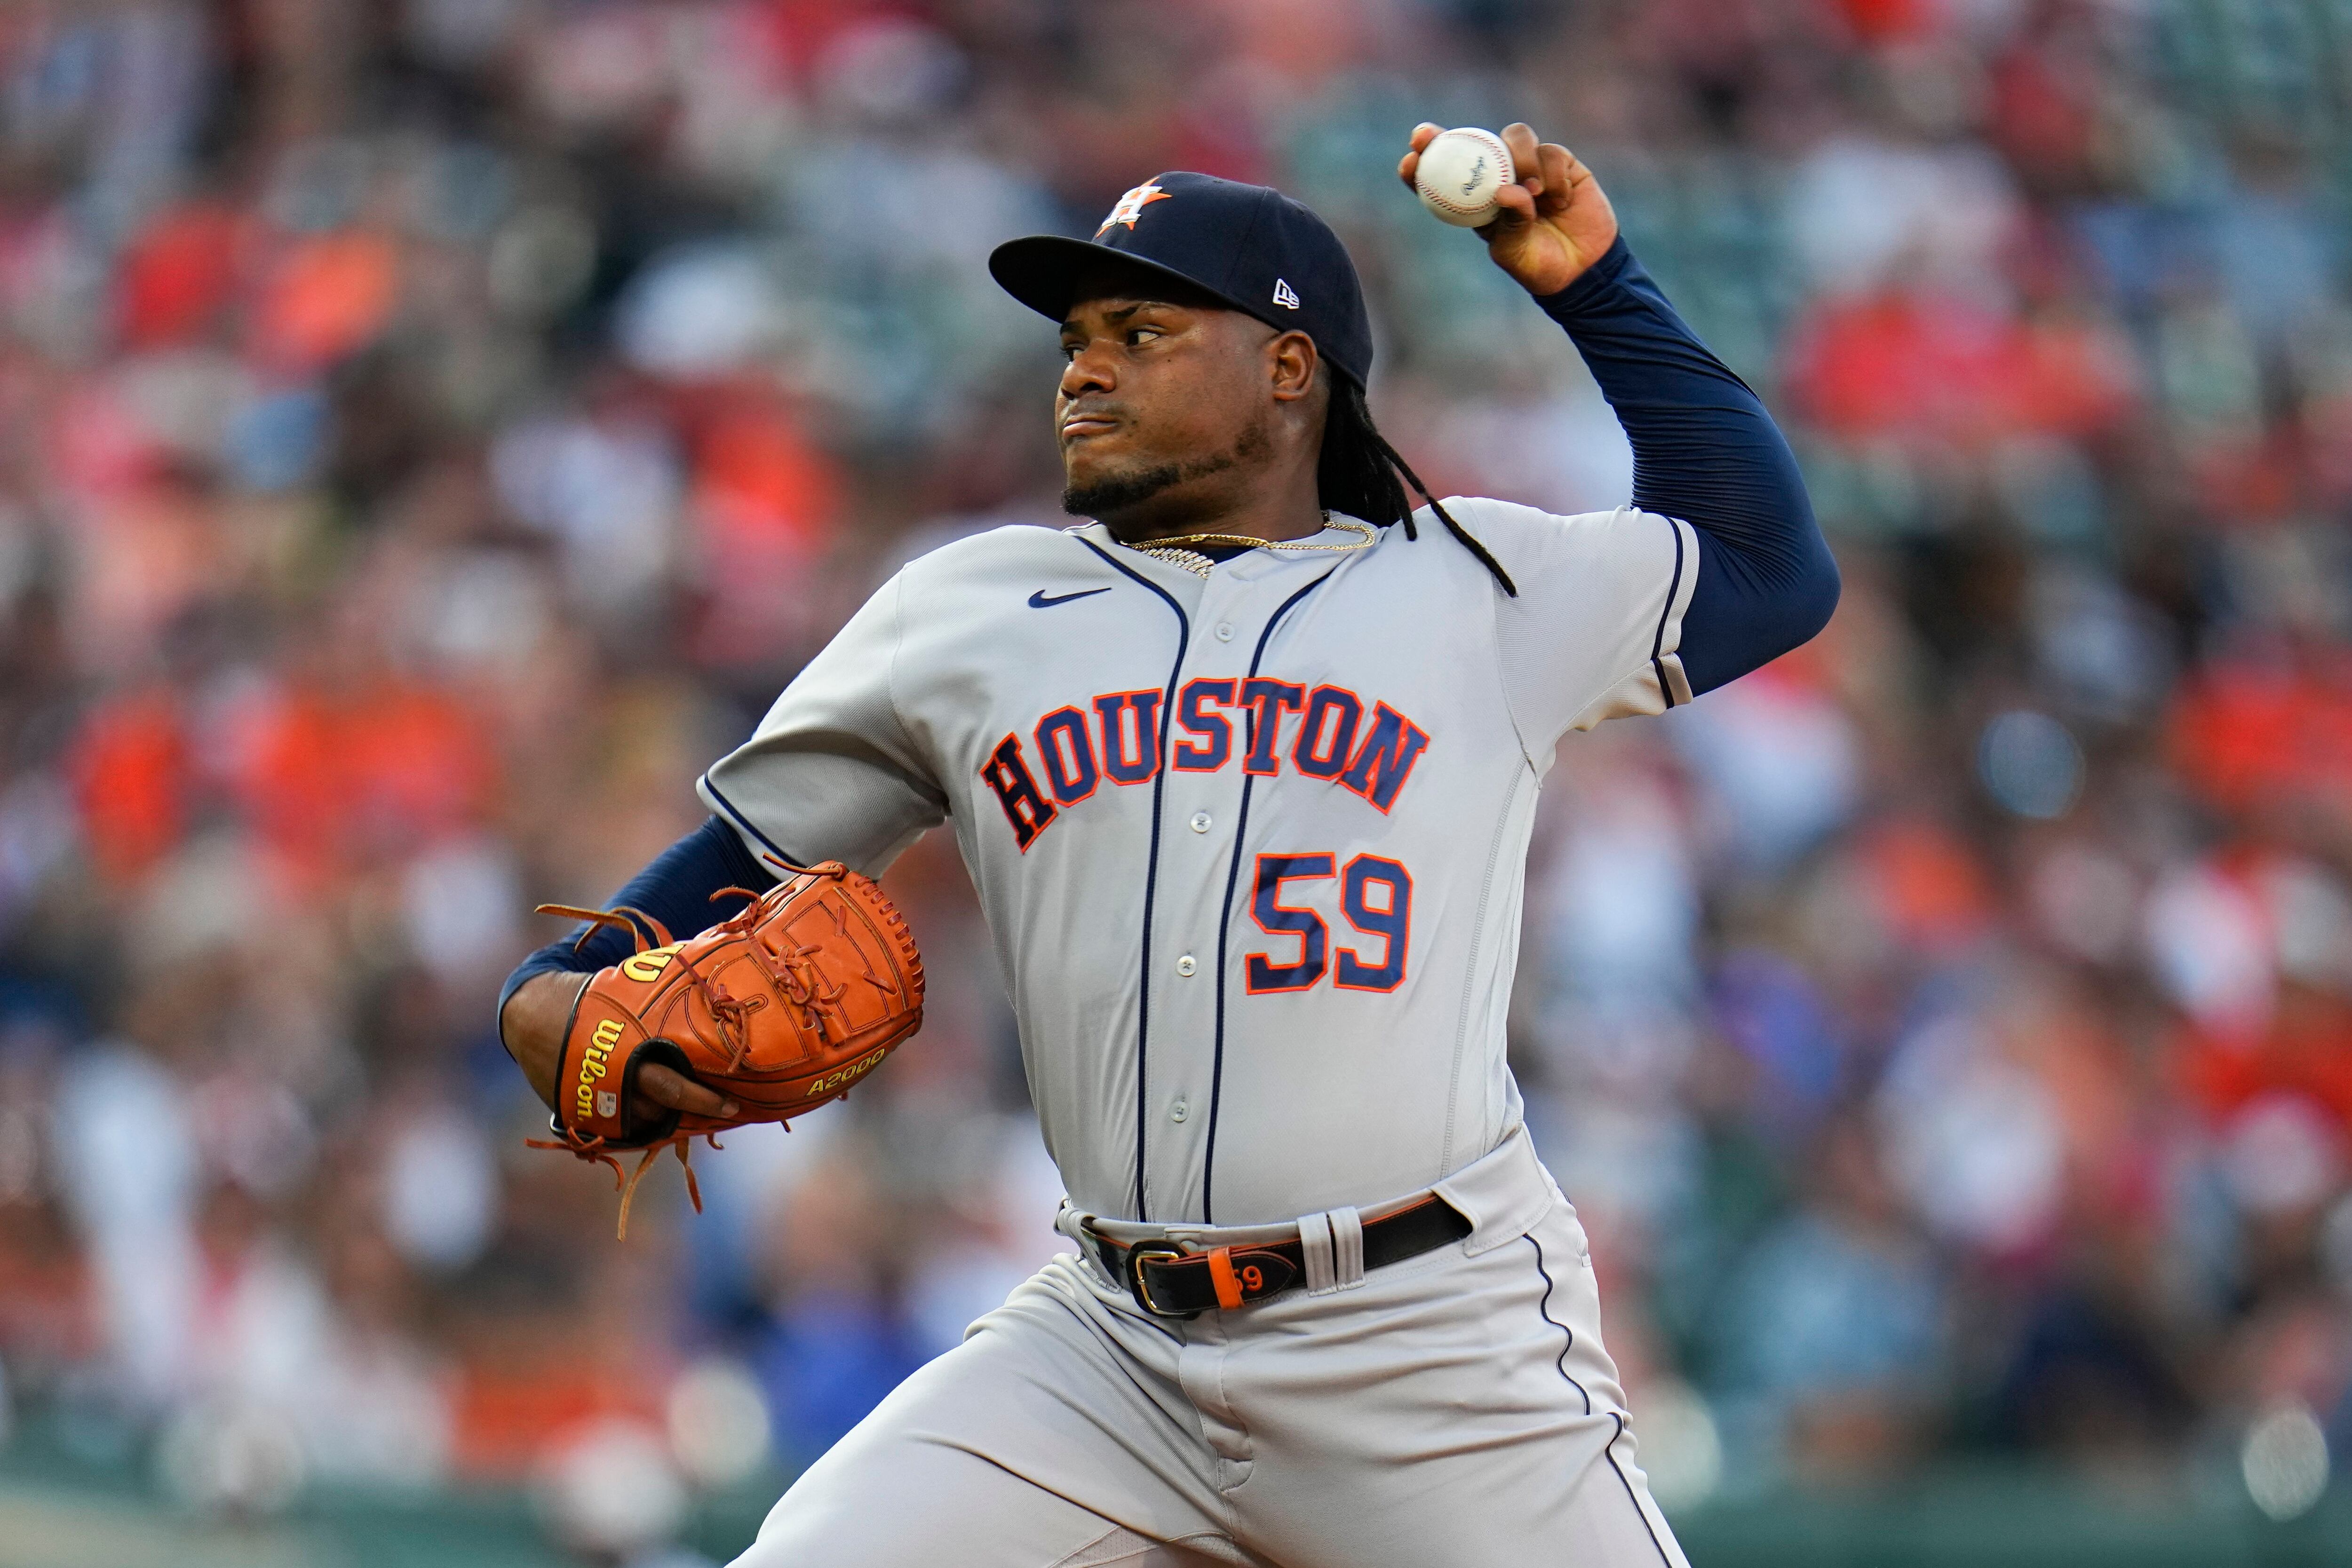 Astros: Kyle Tucker Called Game in Grand Fashion